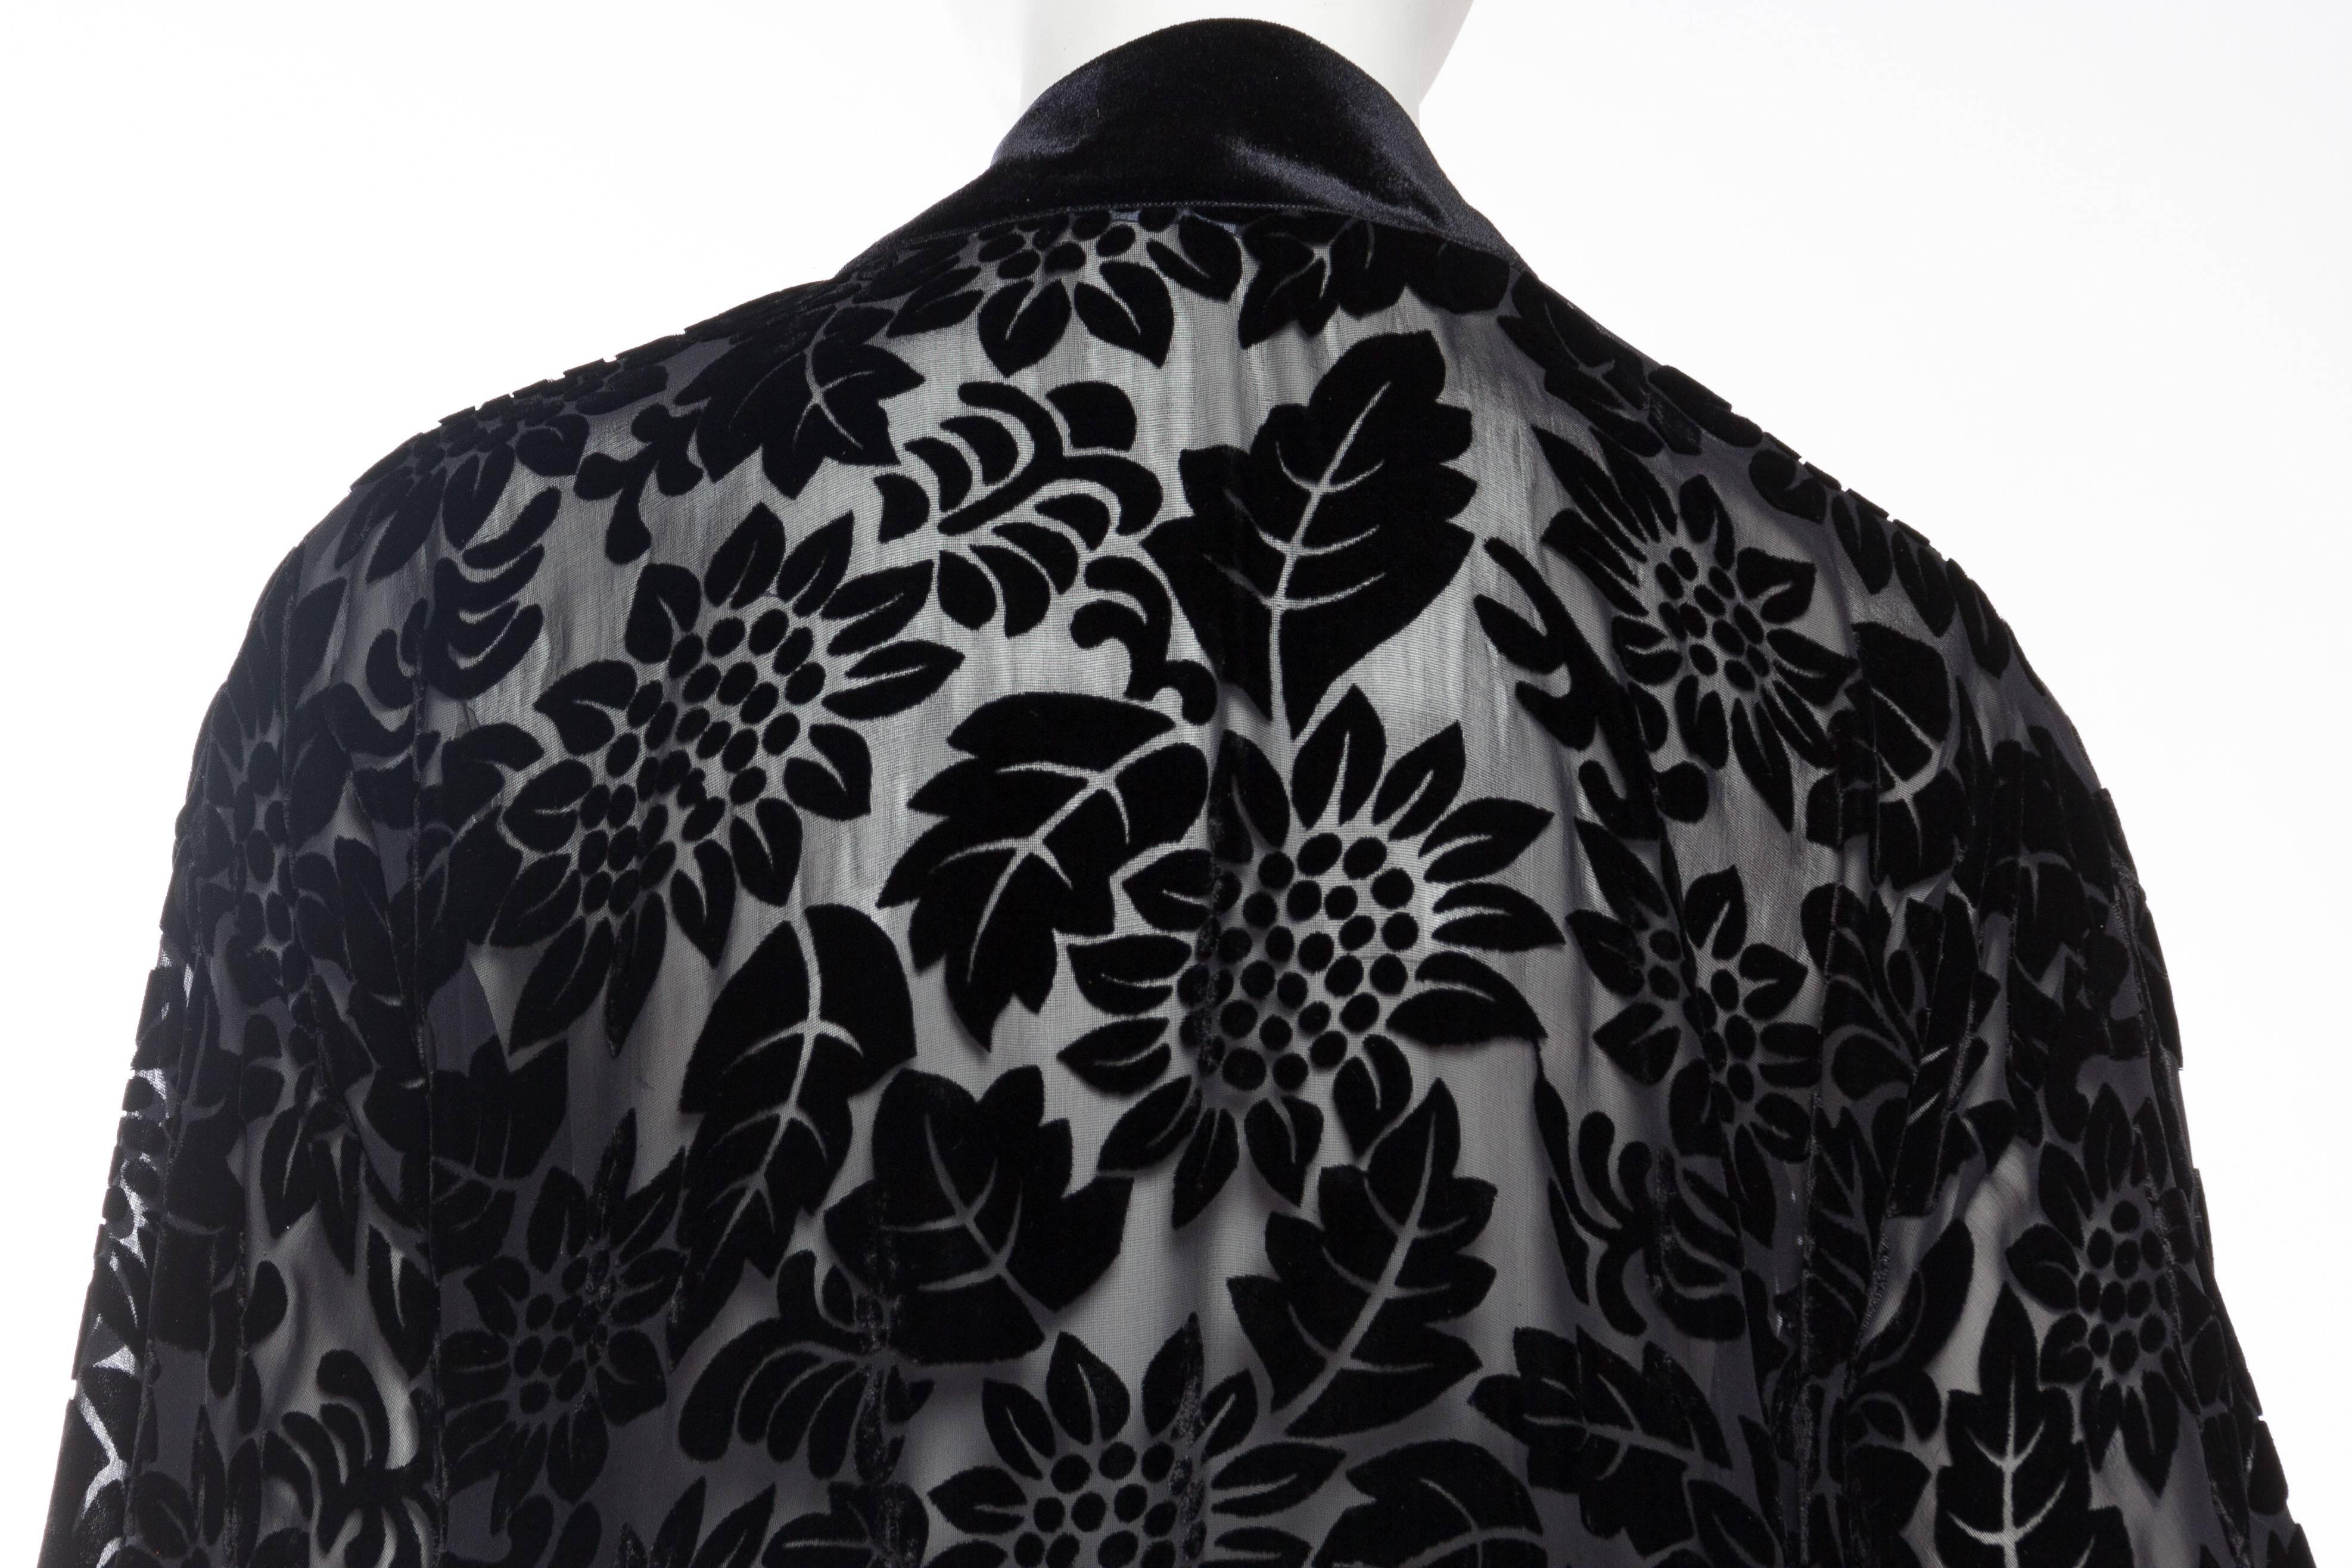 MORPHEW COLLECTION Black Floral Silk Burnout Velvet Sheer Fringed  Kimono In Excellent Condition For Sale In New York, NY